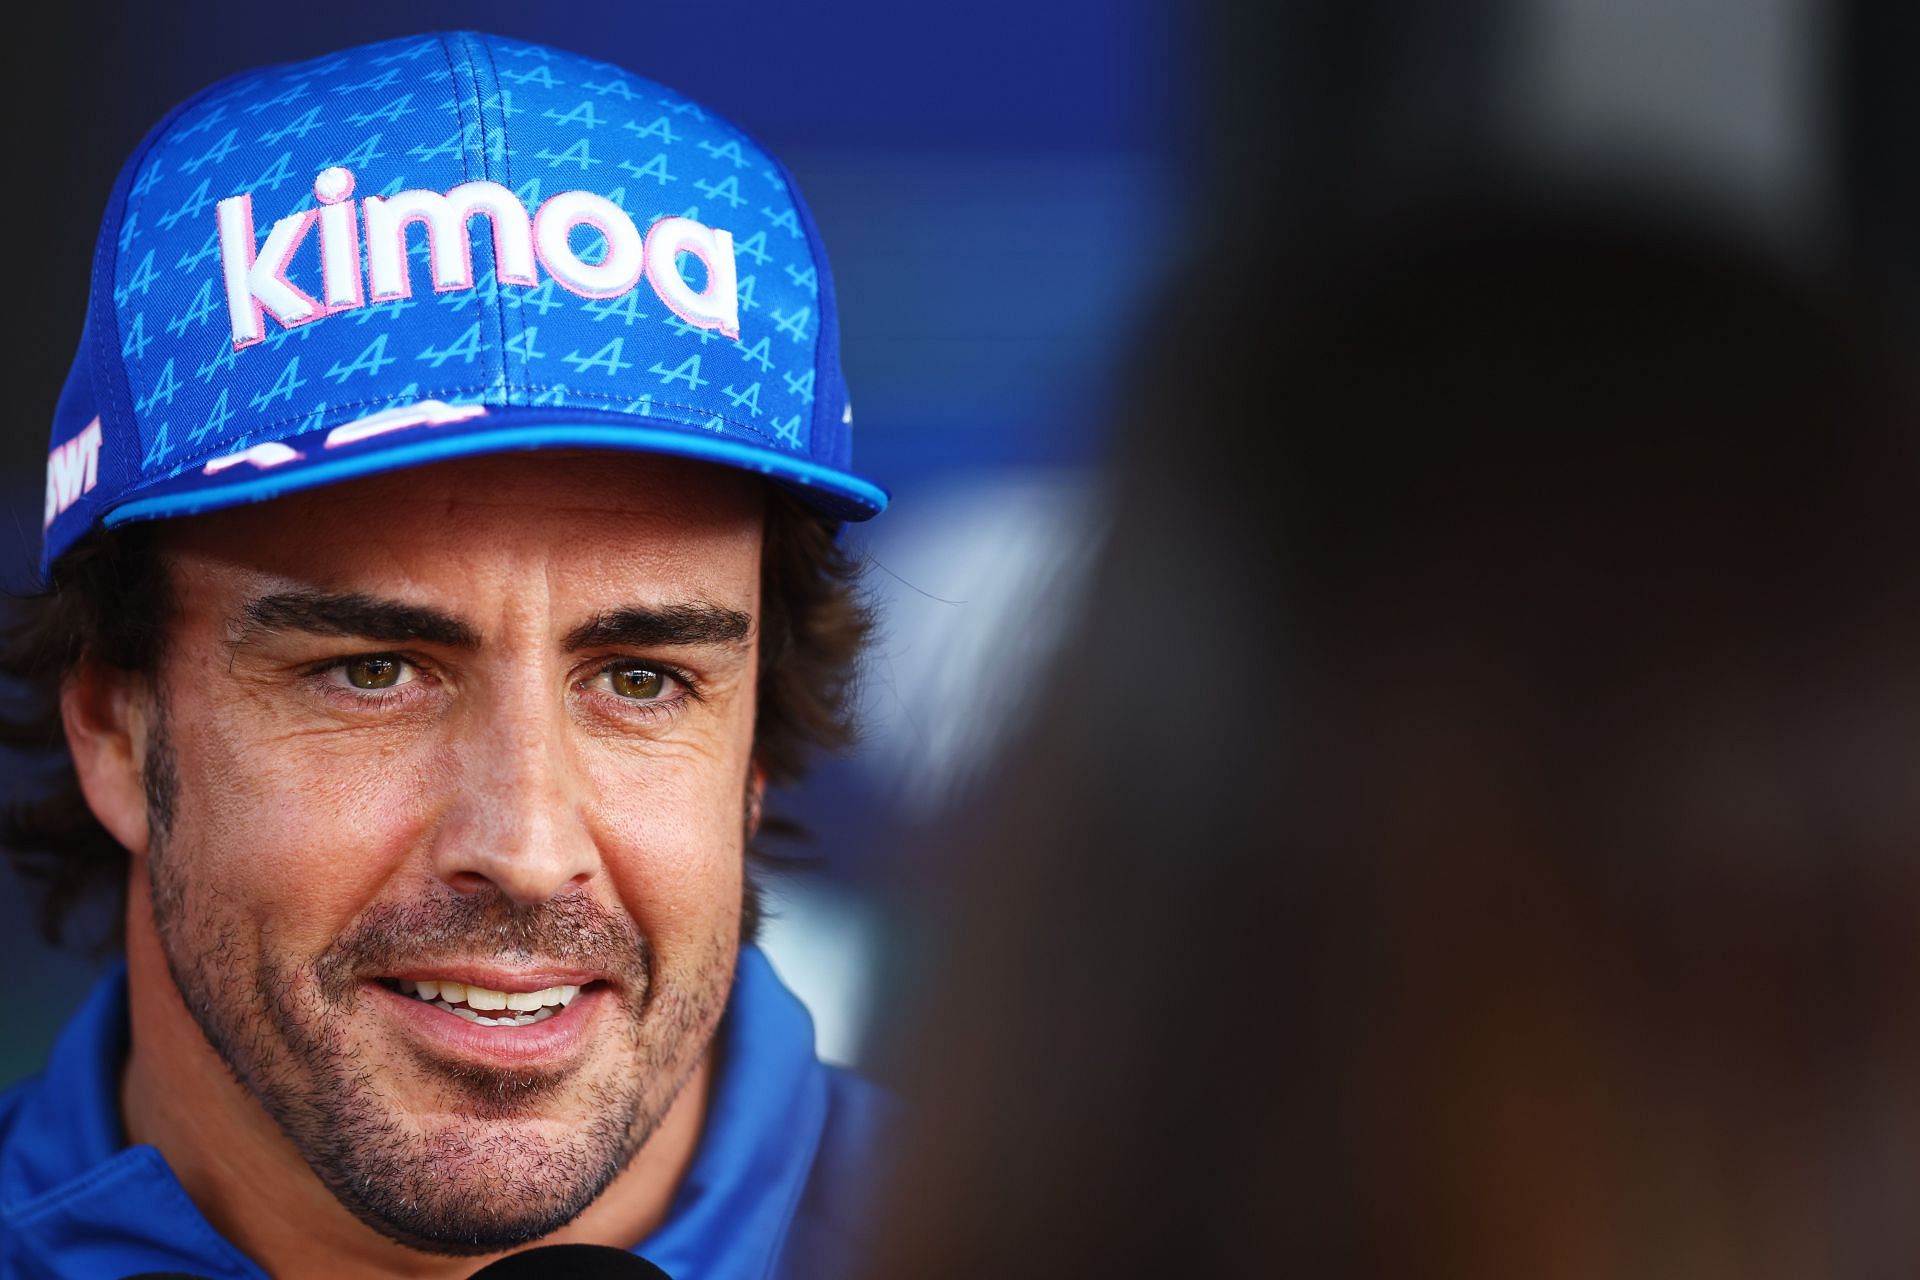 Fernando Alonso during previews ahead of the F1 Grand Prix of Hungary at Hungaroring on July 28, 2022, in Budapest, Hungary (Photo by Francois Nel/Getty Images)